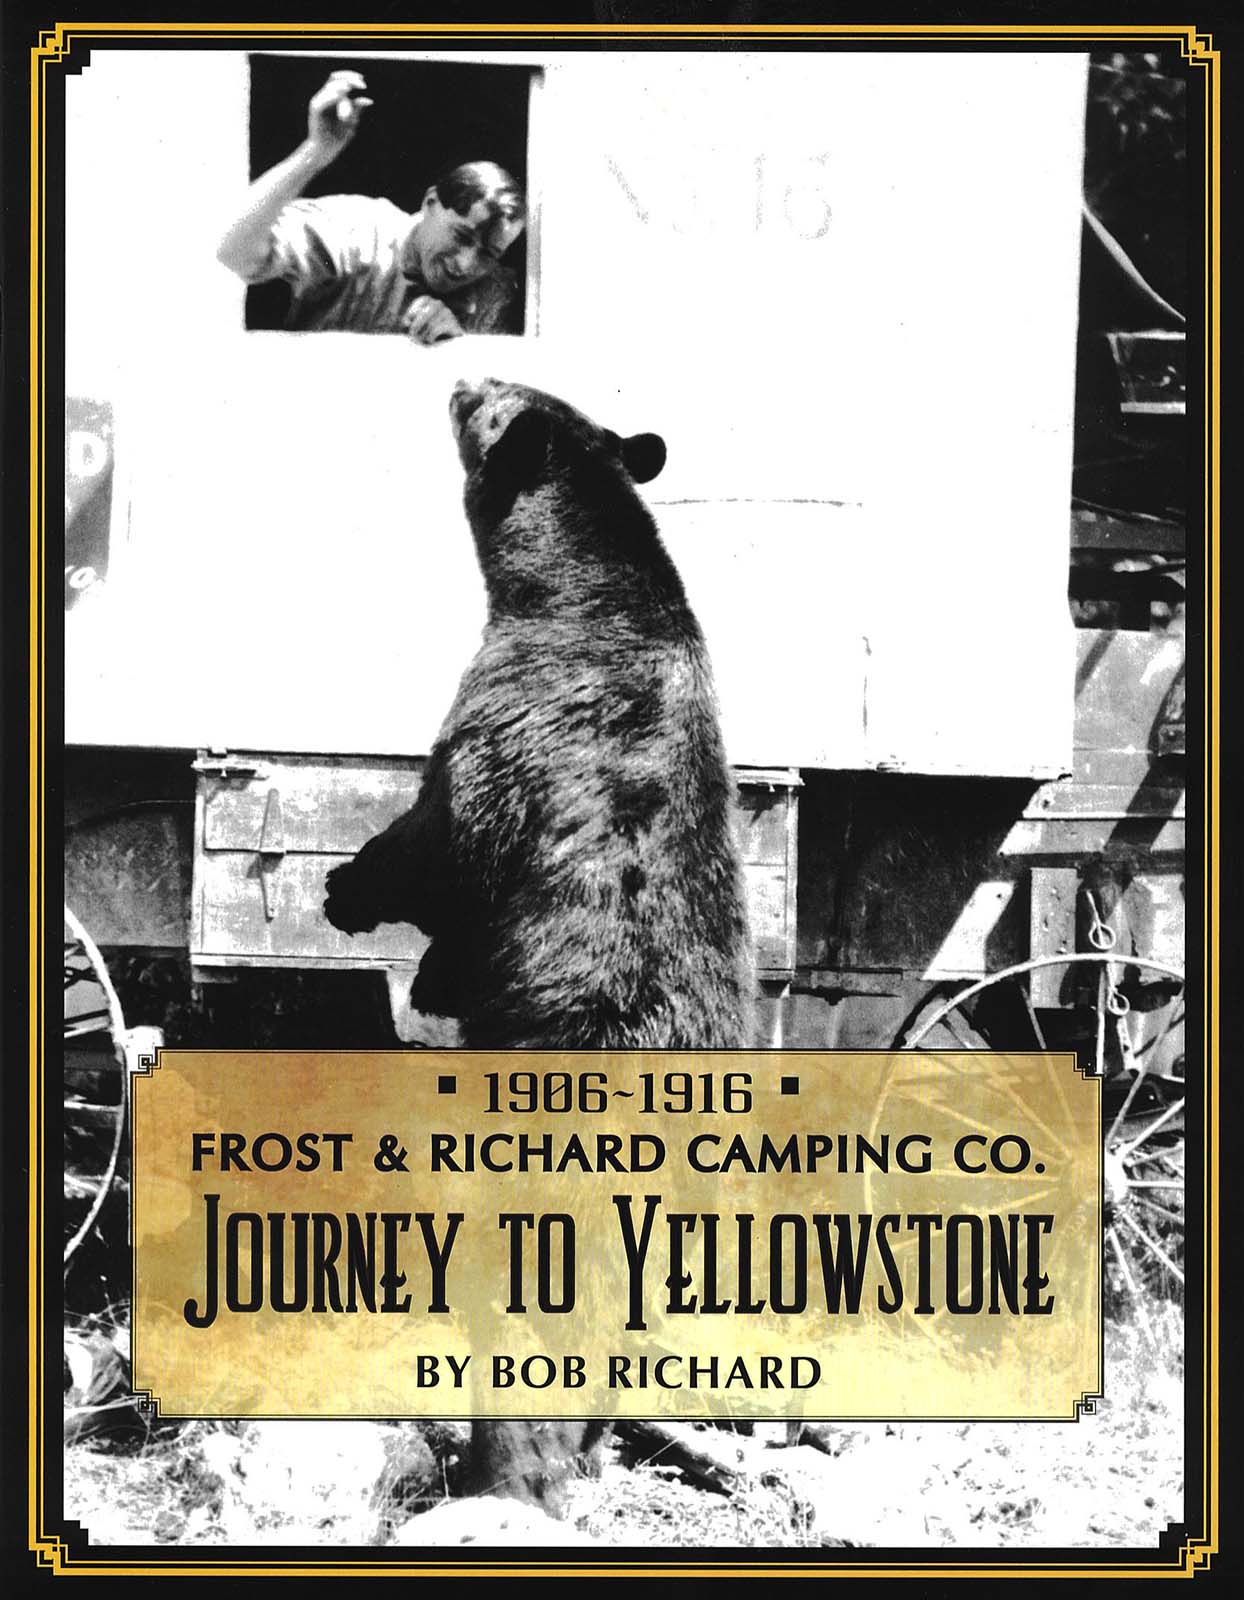 Book cover, Bob Richard's "Frost & Richard Camping Co. Journey to Yellowstone" 